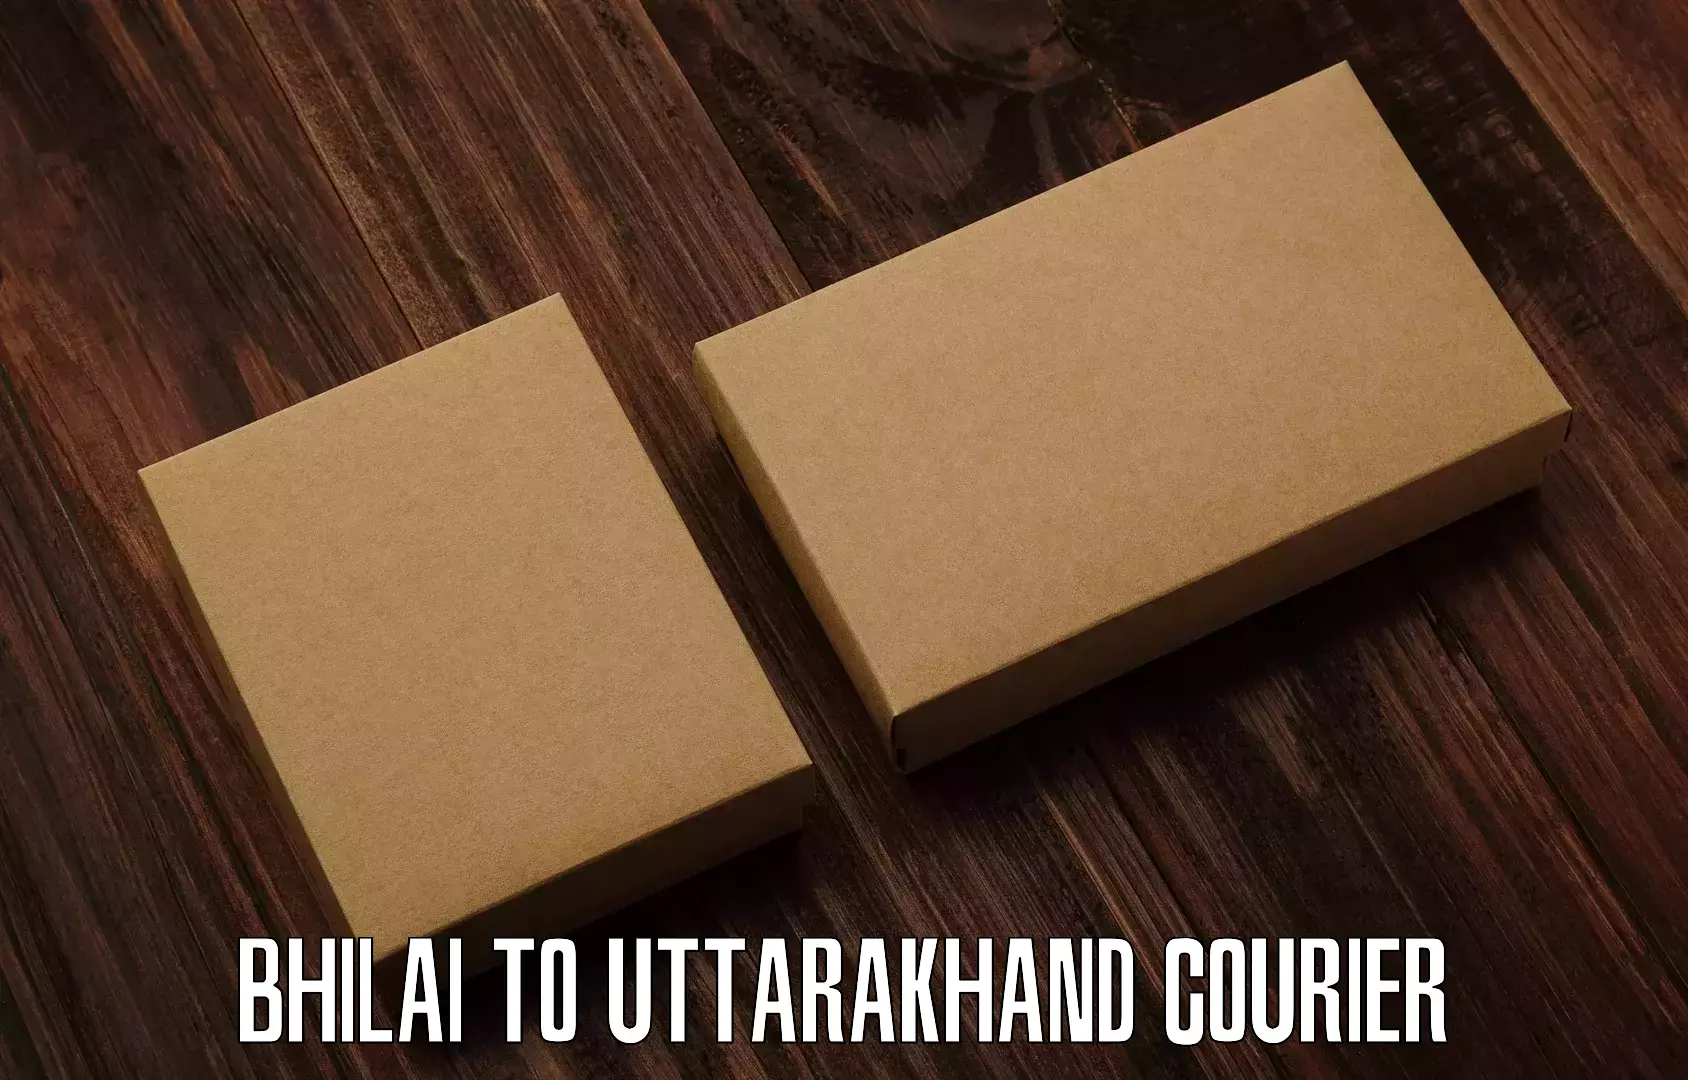 Courier service innovation Bhilai to Rudrapur